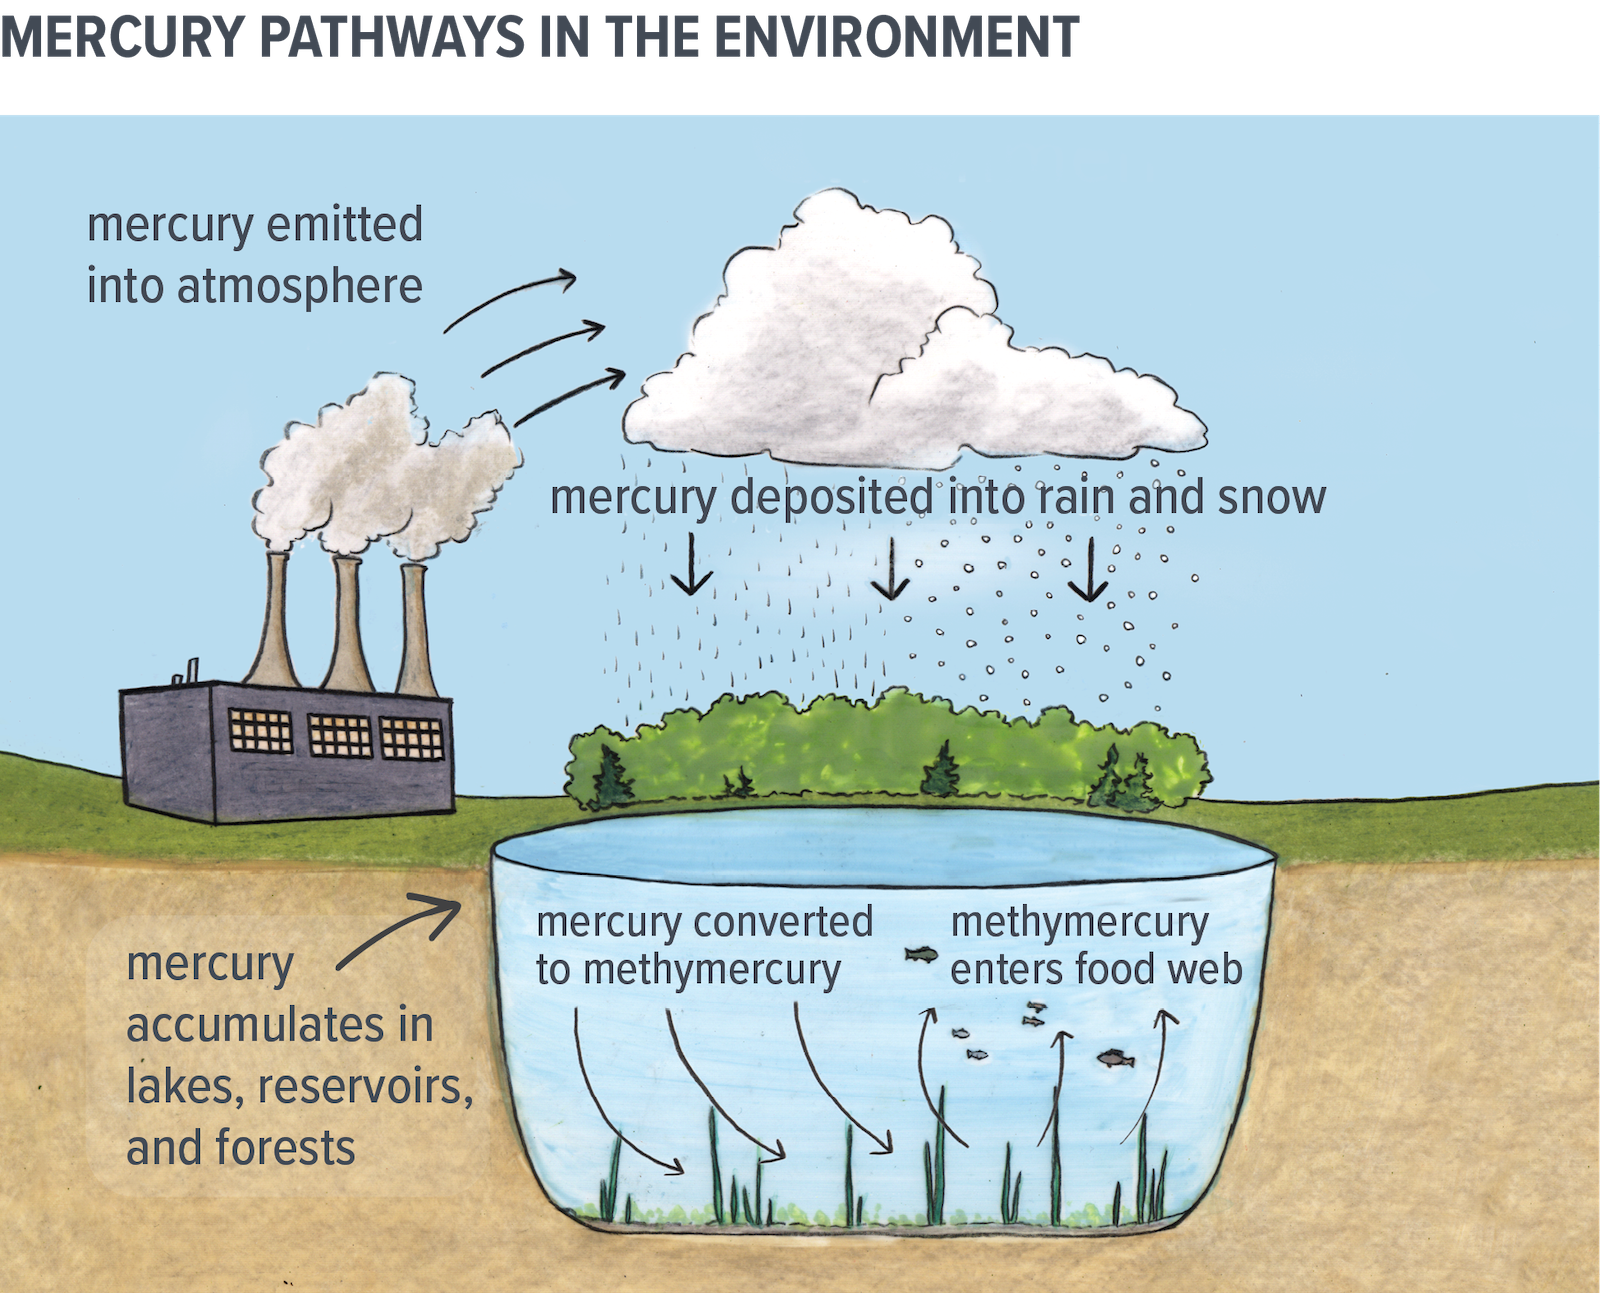 Drawing showing mercury pathways in the environment. Mercury is emitted into the atmosphere during industrial activities, it is deposited in rain and snow, accumulating in lakes, reservoirs and forests. The image shows that at the bottom of lakes, mercury is converted into methylmercury, which enters the food chain.